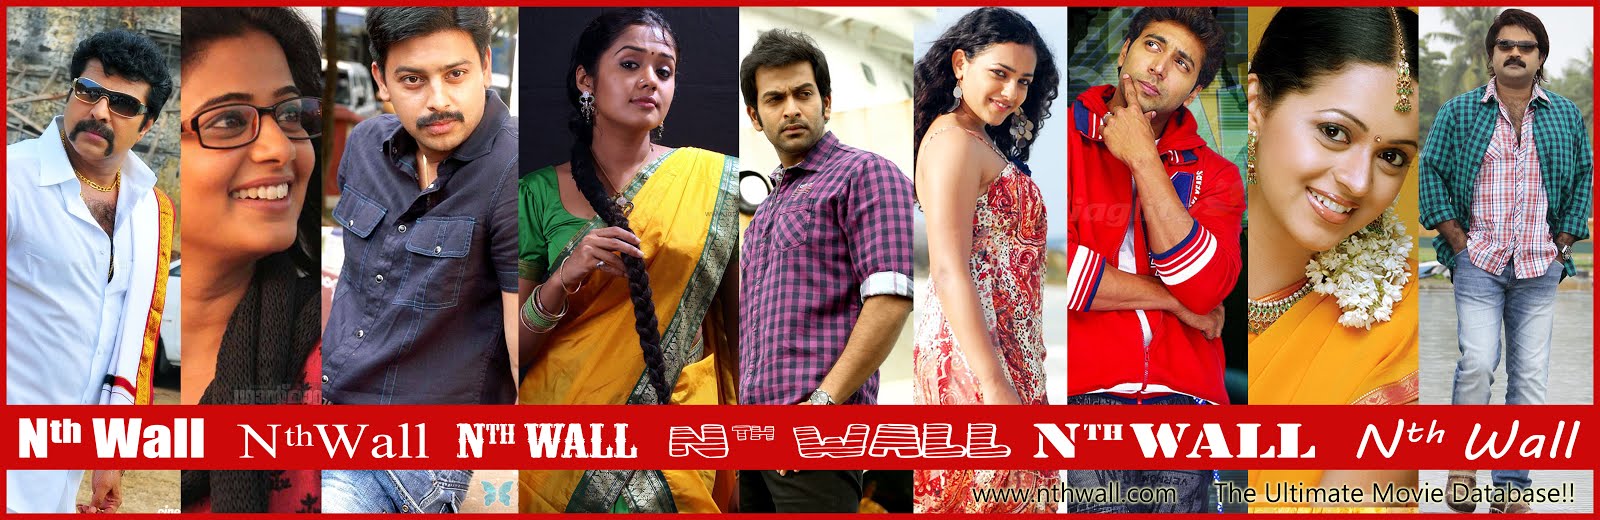 Malayalam Movies Trailers News Video Songs Wall Papers Ringtones